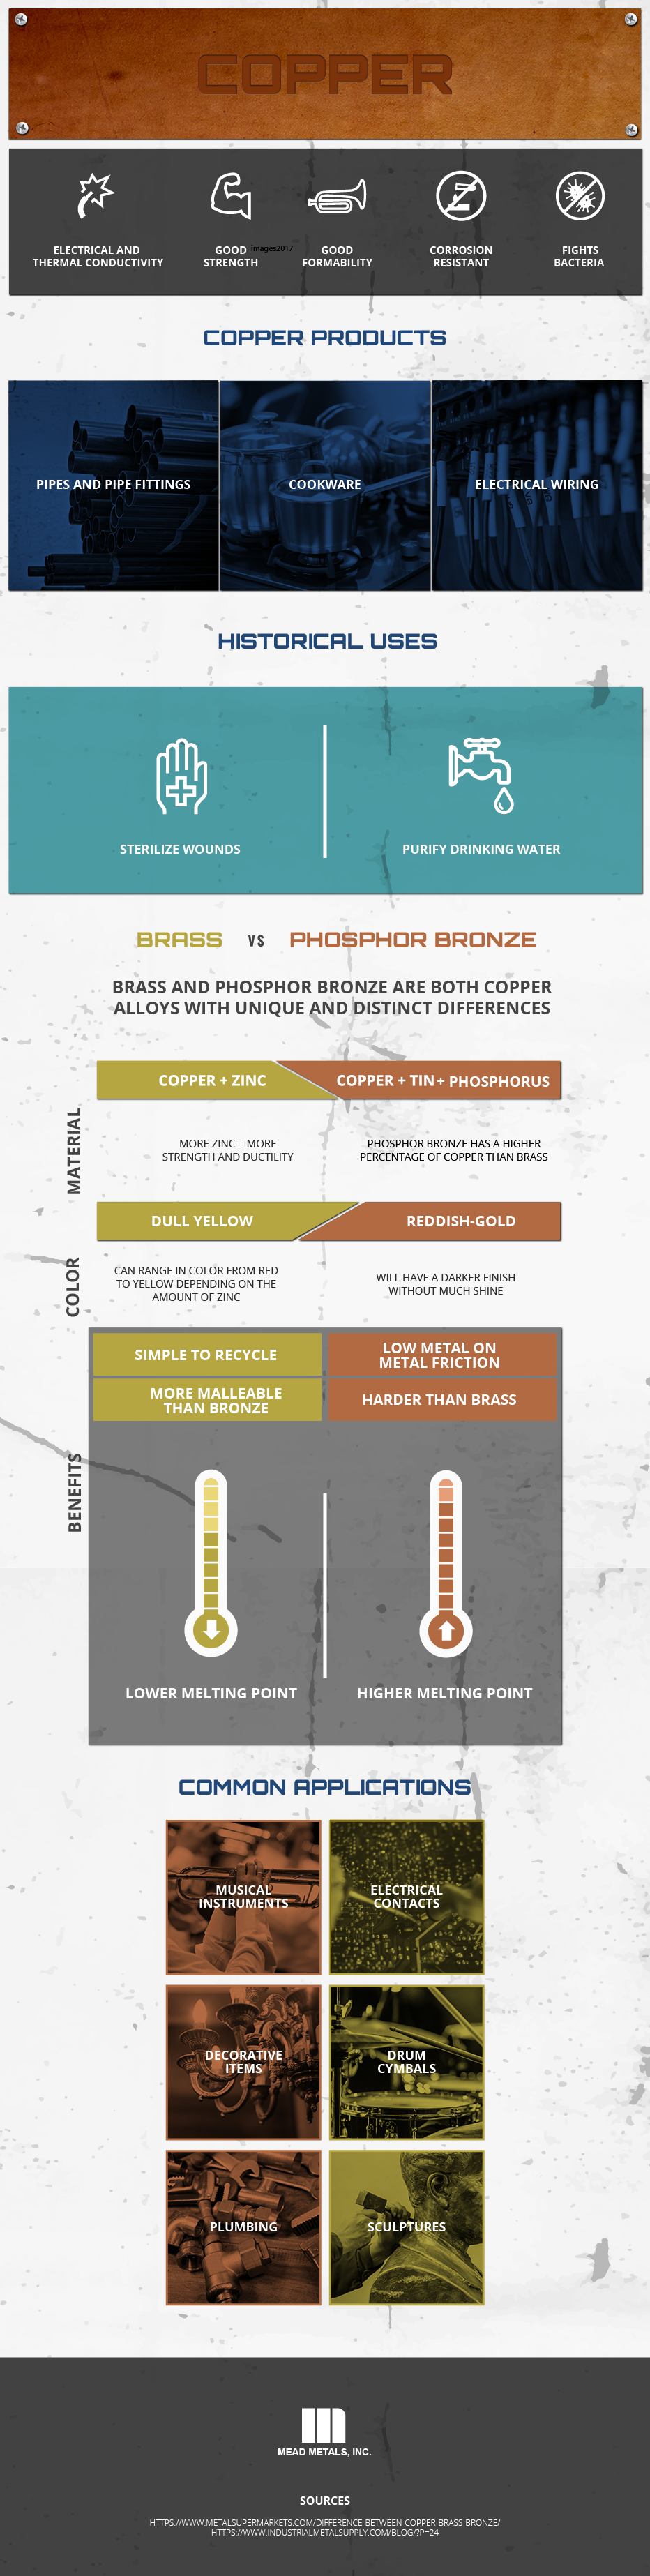 The Differences Between Brass and Copper